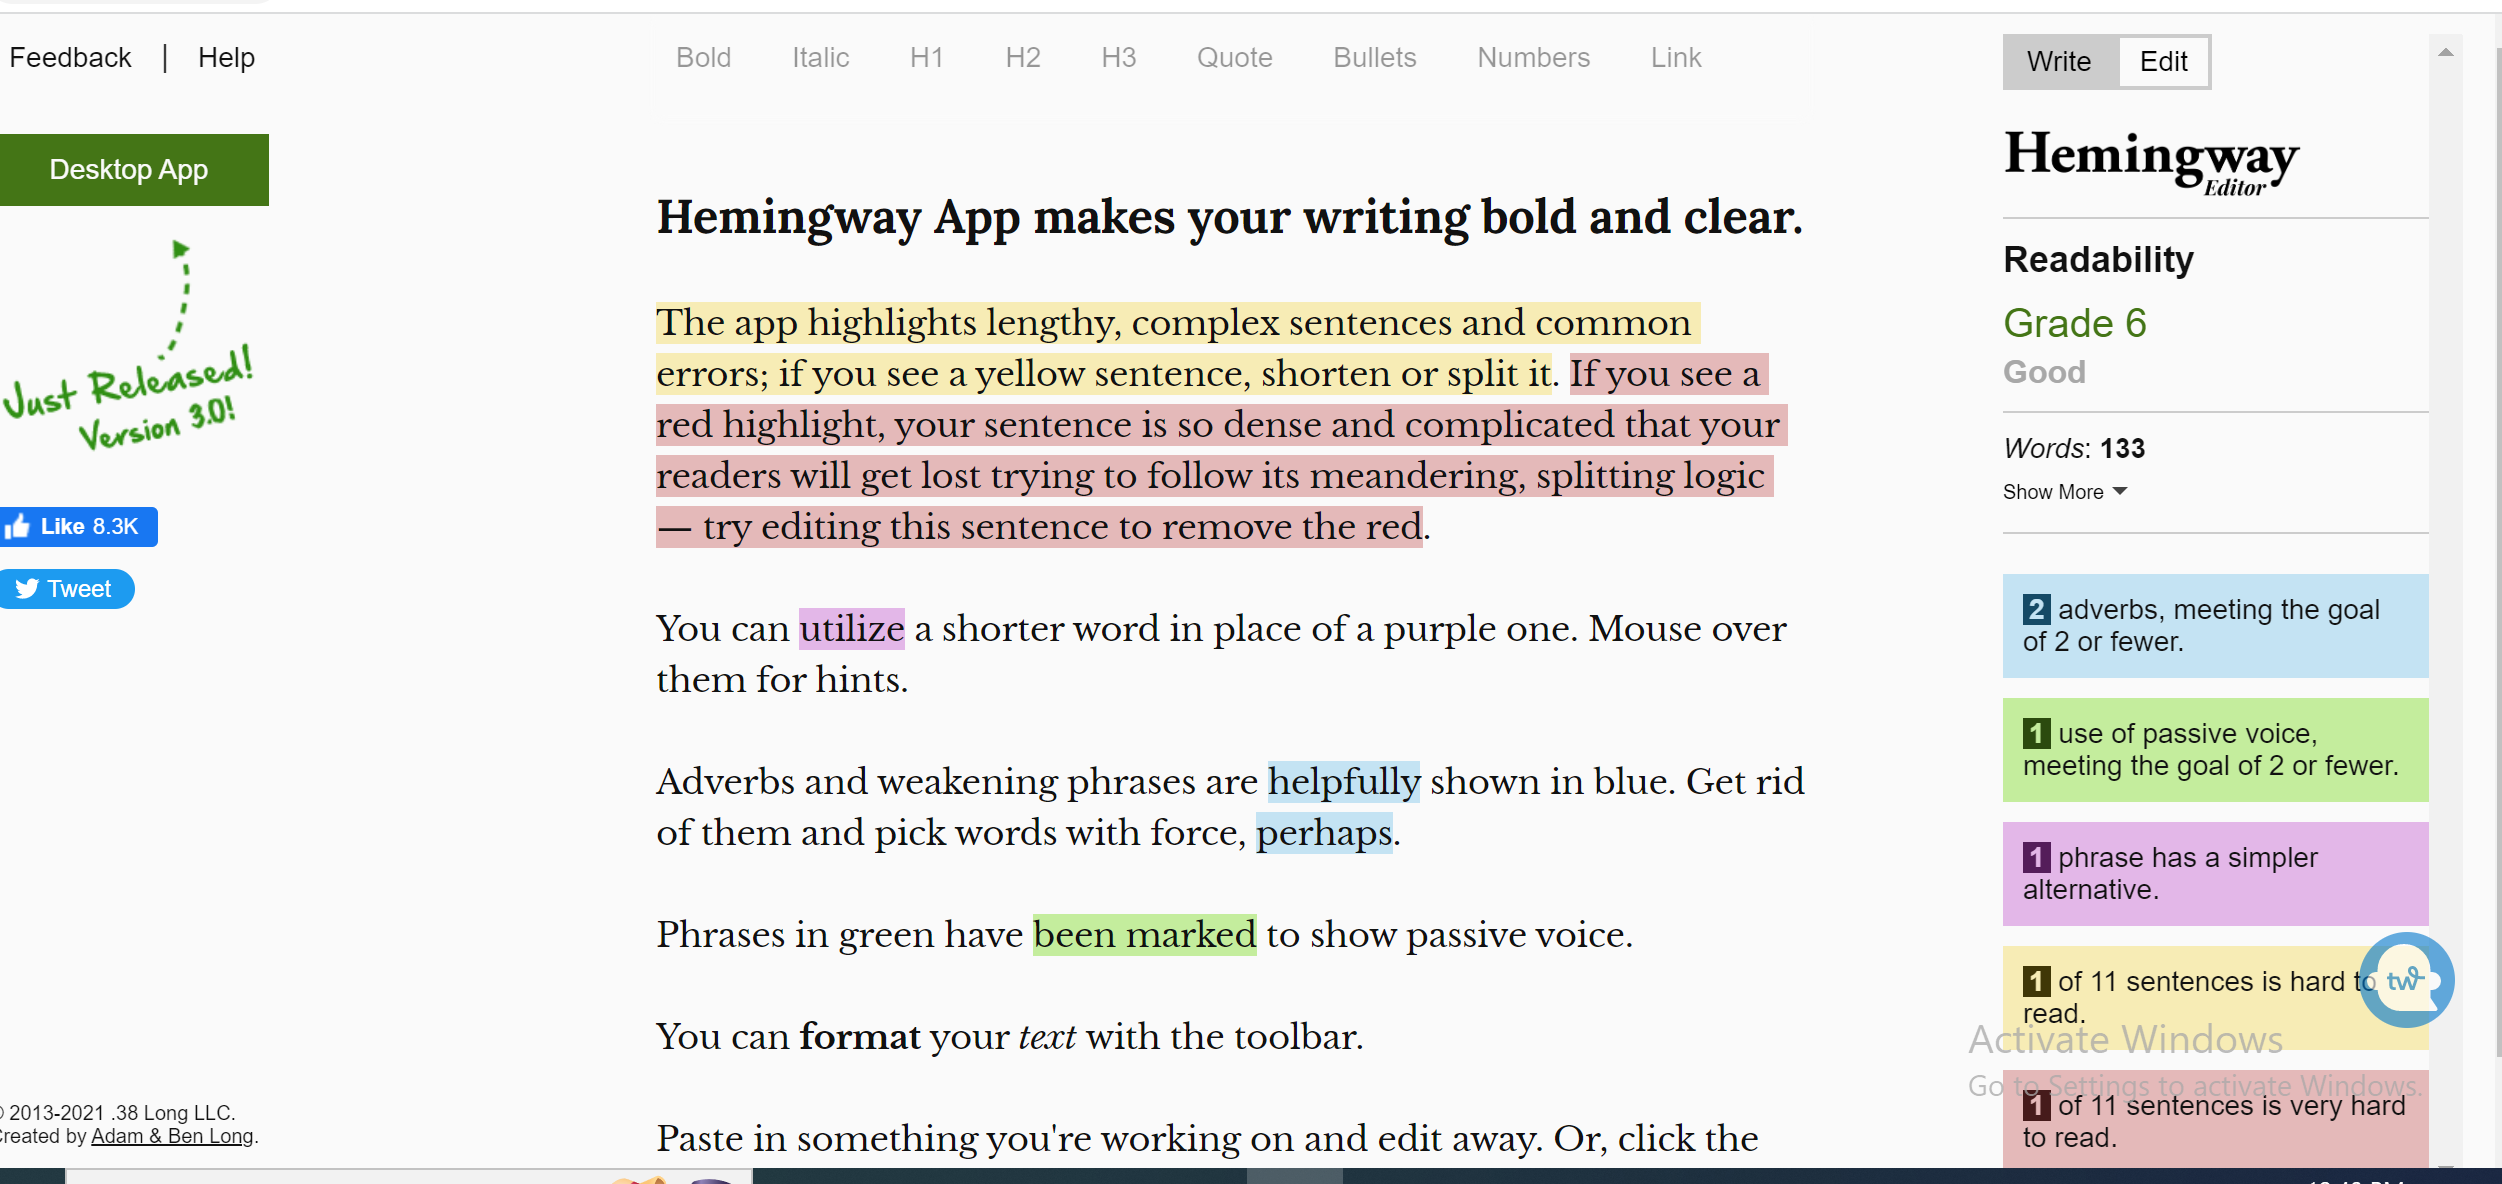 alt="How to use Hermingway App for SEO in Content Writing"